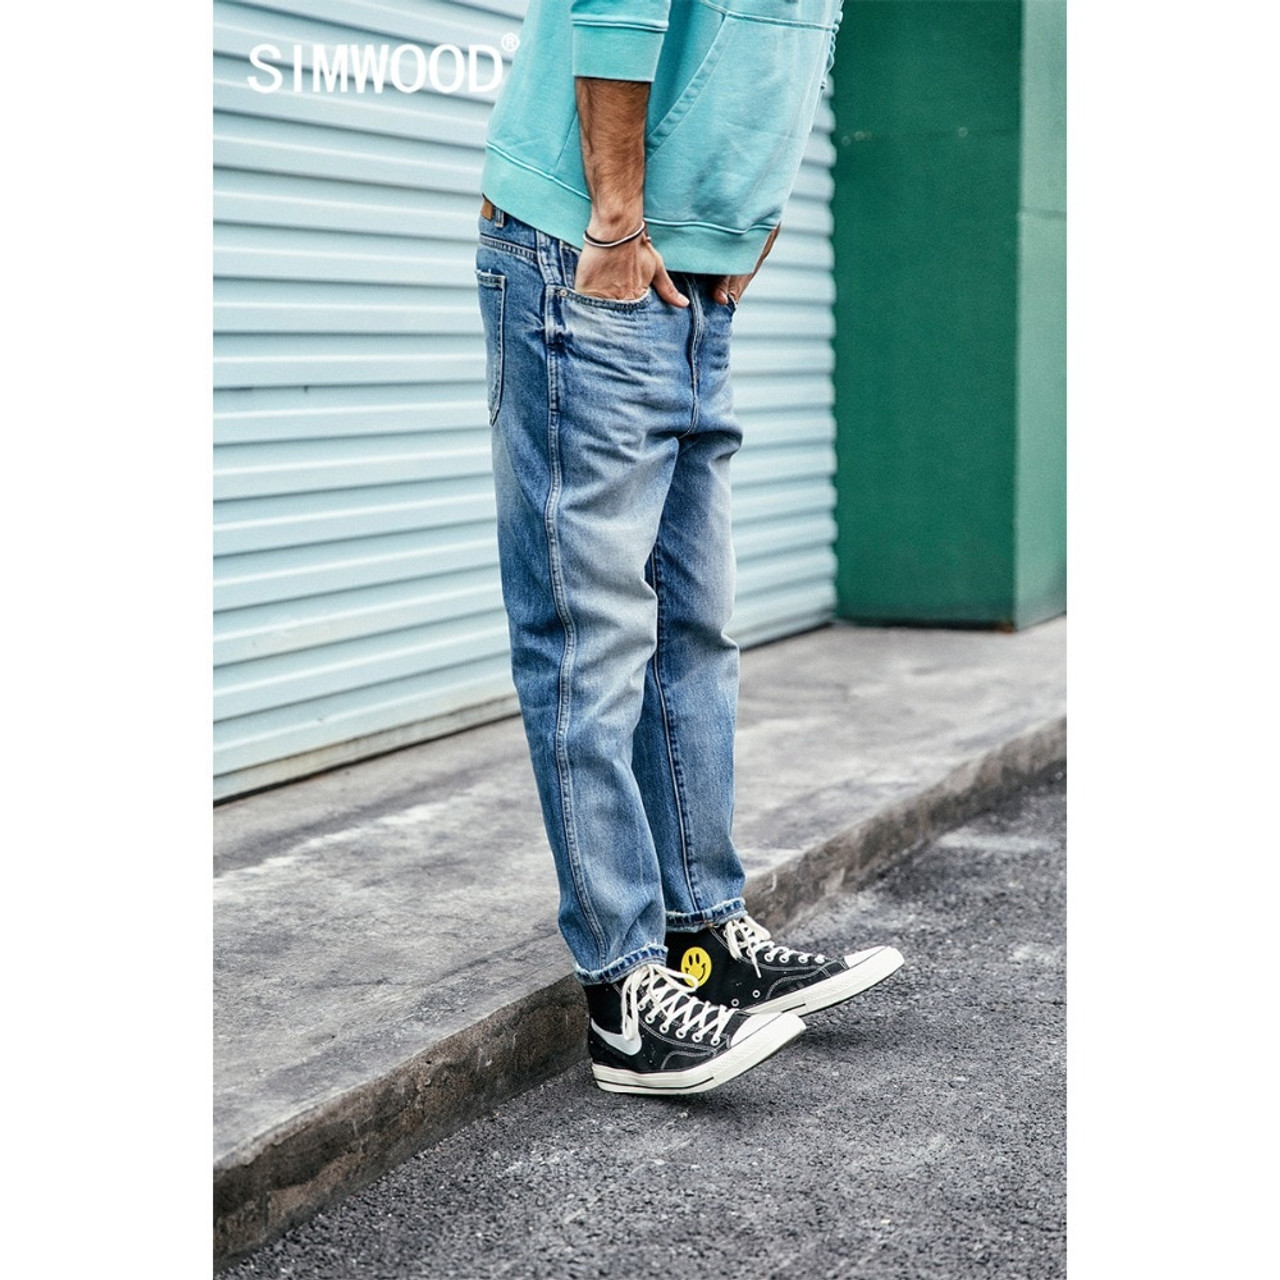 HCXY Brand Mens Ankle Length Denim Ankle Pants Men Classic Autumn Style For  Stretchy And Loose Fit From Choxxxcomb, $24.69 | DHgate.Com